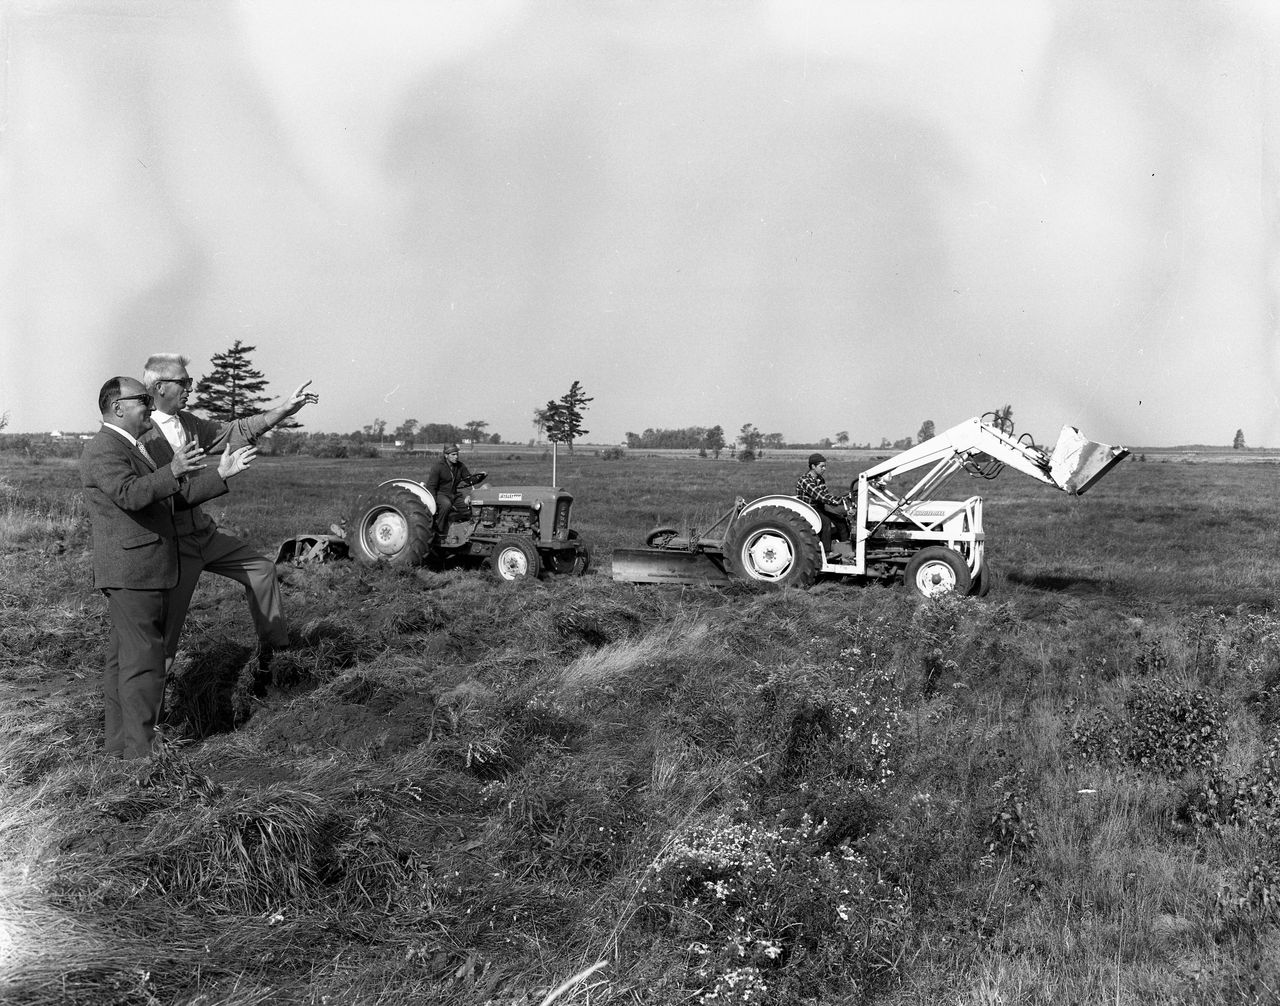 Black and white photograph of two men overseeing the start of construction of the golf course on vacant land. Behind them, two men operate machinery.